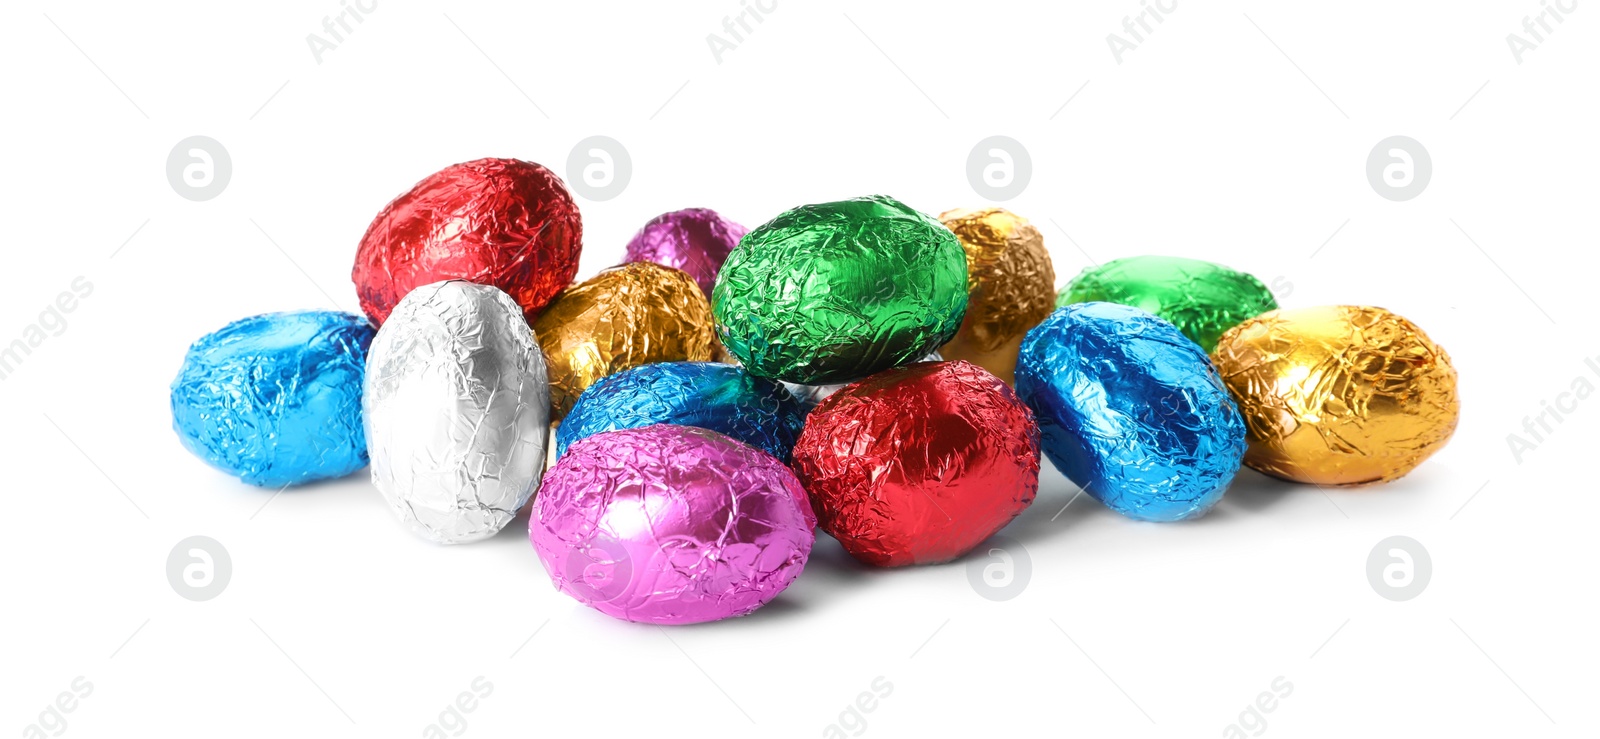 Photo of Chocolate eggs wrapped in colorful foil on white background